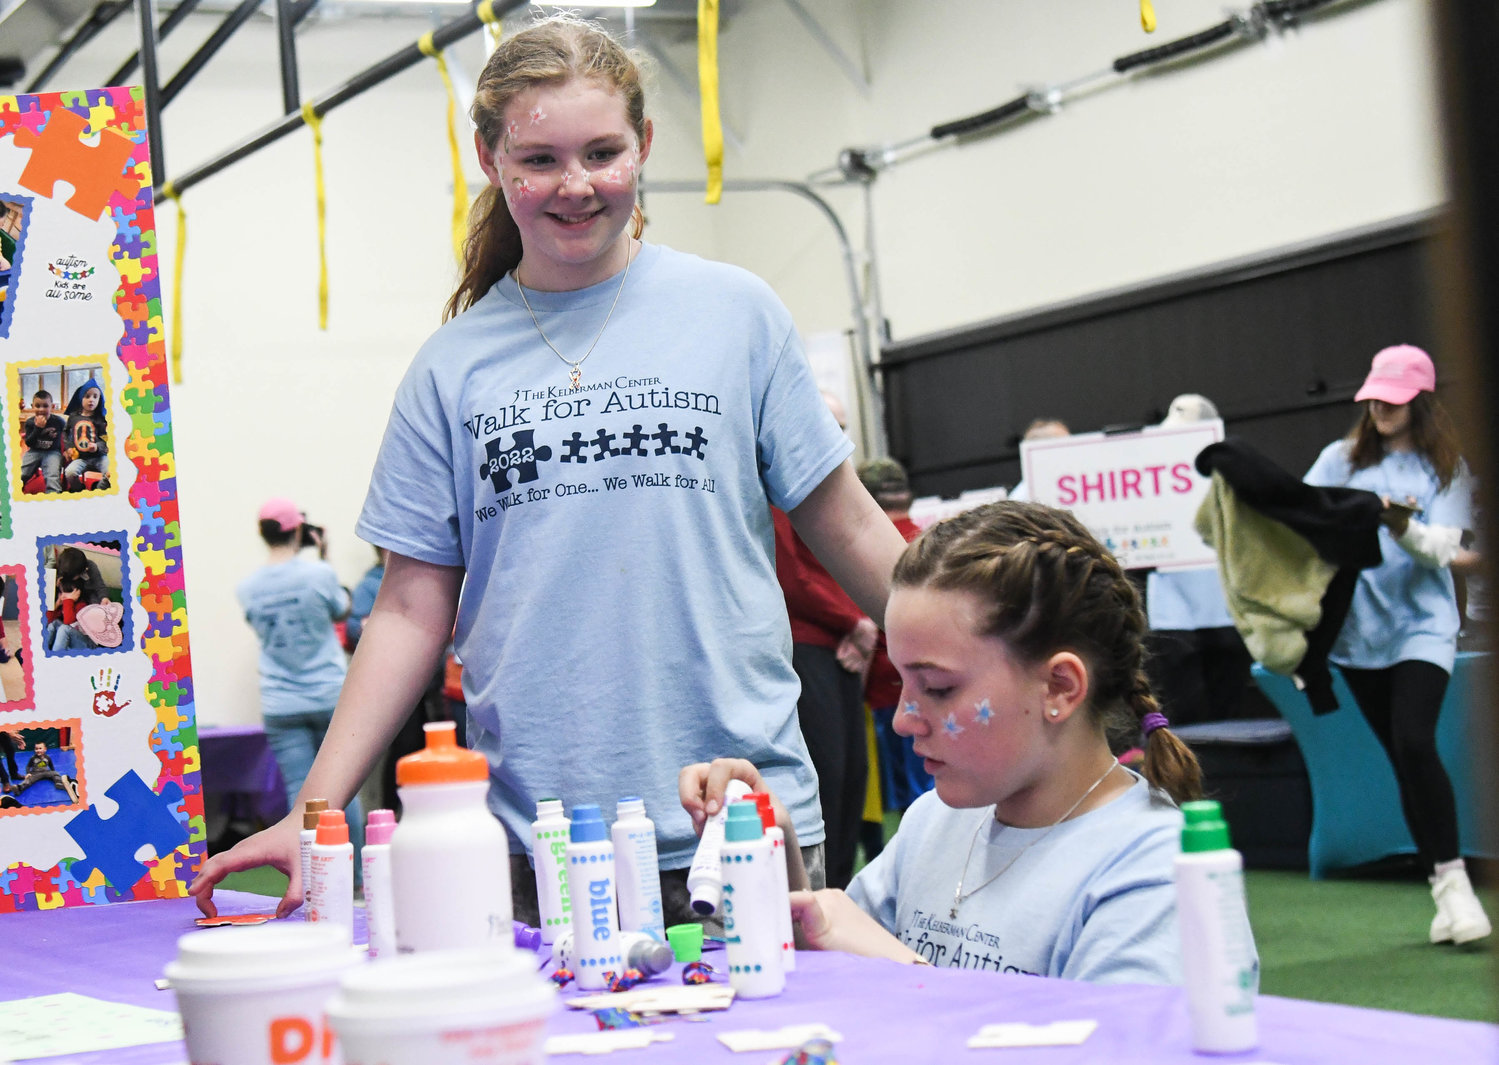 Shea Mundell, left, and Reese Rowlands decorate colored puzzle pieces during the annual Walk for Autism on Saturday at The Fitness Mill in Utica. The event, which seeks to raise awareness of Autism Spectrum Disorder and funding for autism programs and services at the Kelberman Center, drew scores of participants.